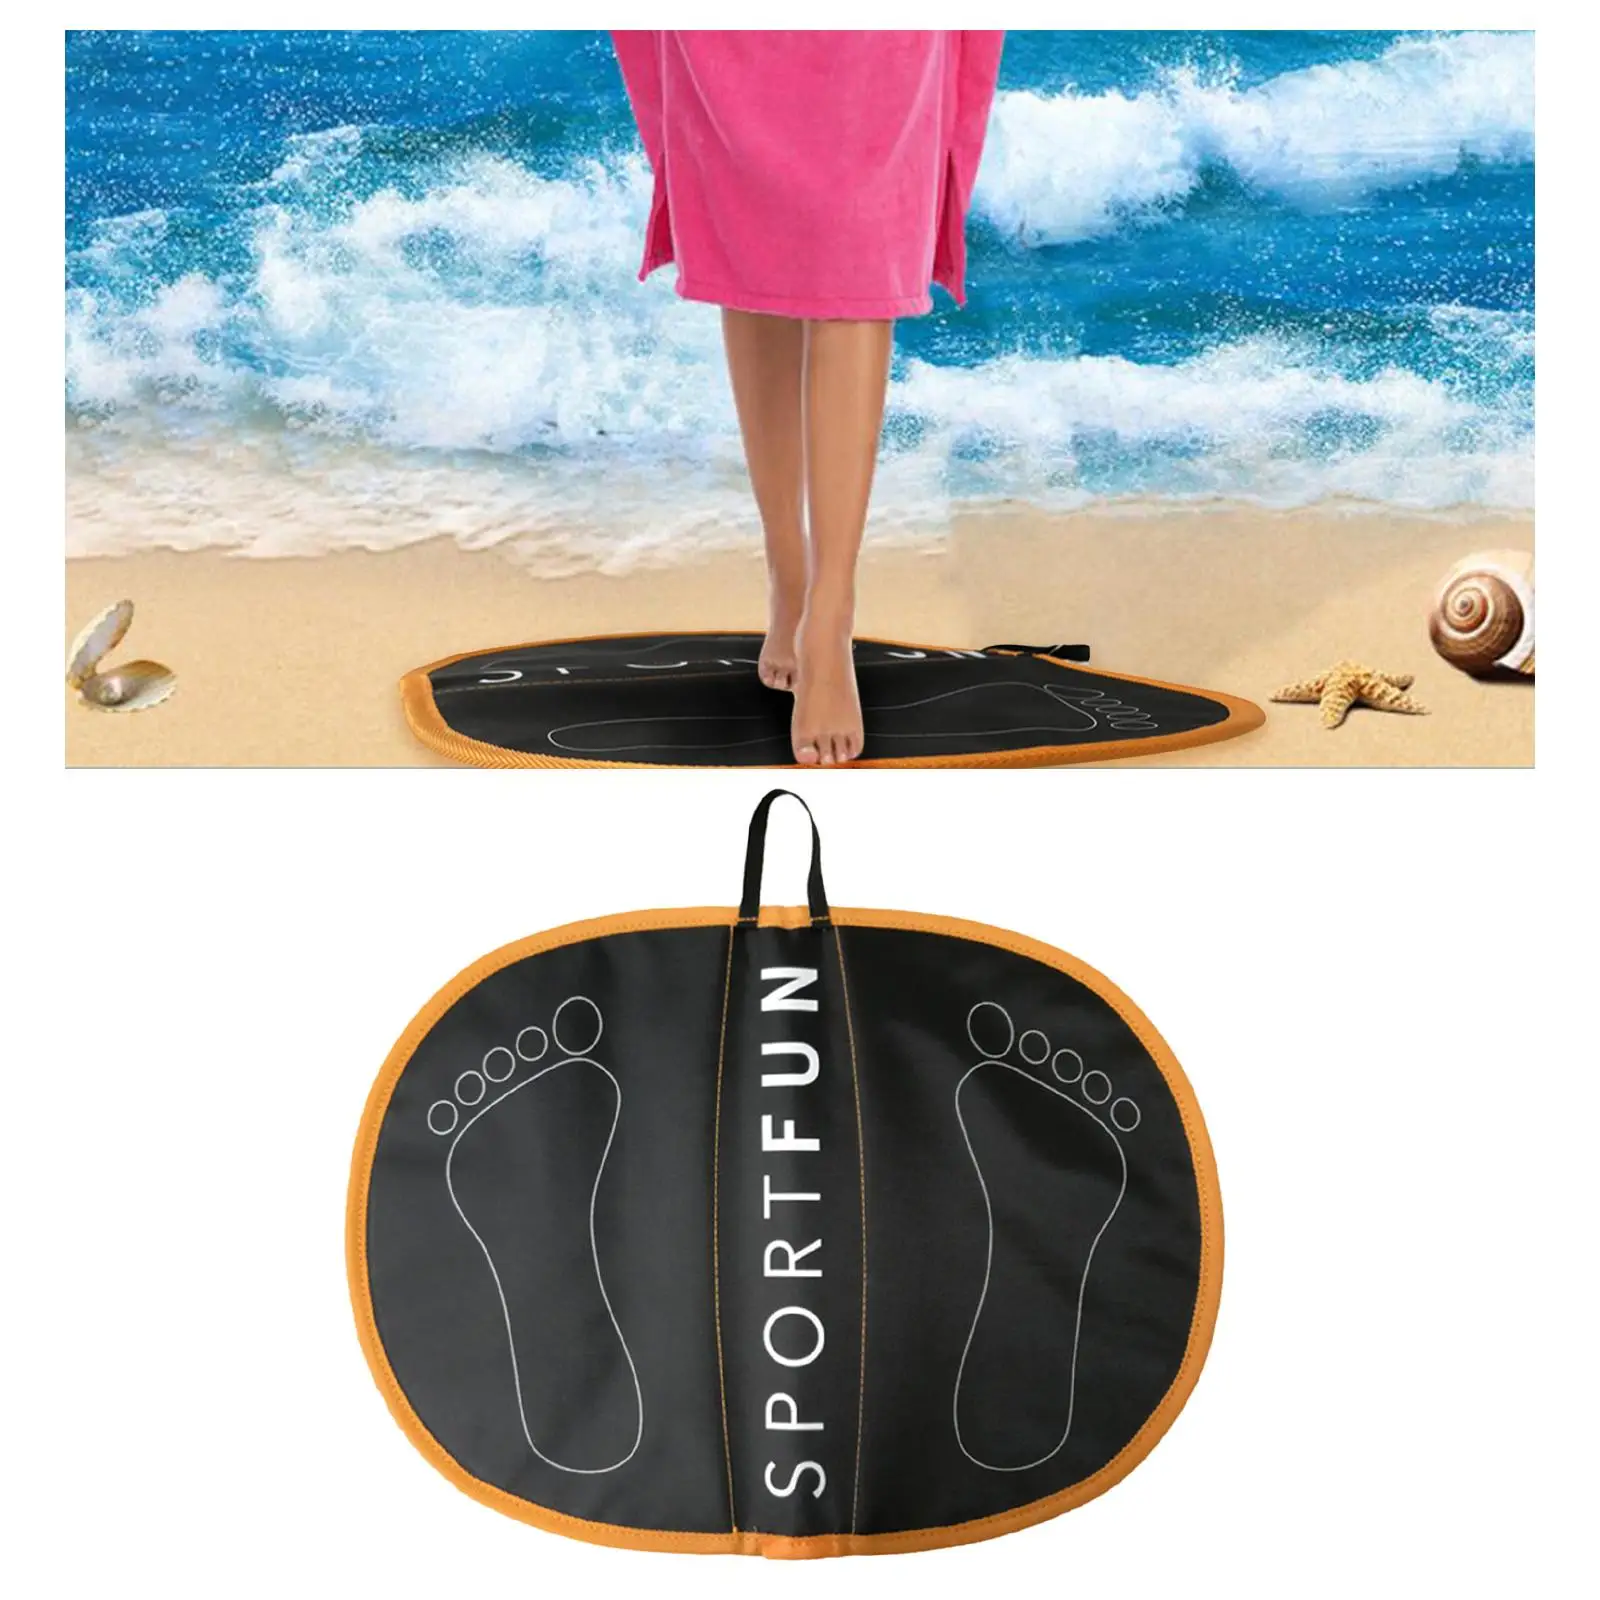 Wetsuit Changing Mat Waterproof Surfers Rafters Foot Pads Water Sports Kayaking Swimming Surfing Changing Mat Accessories